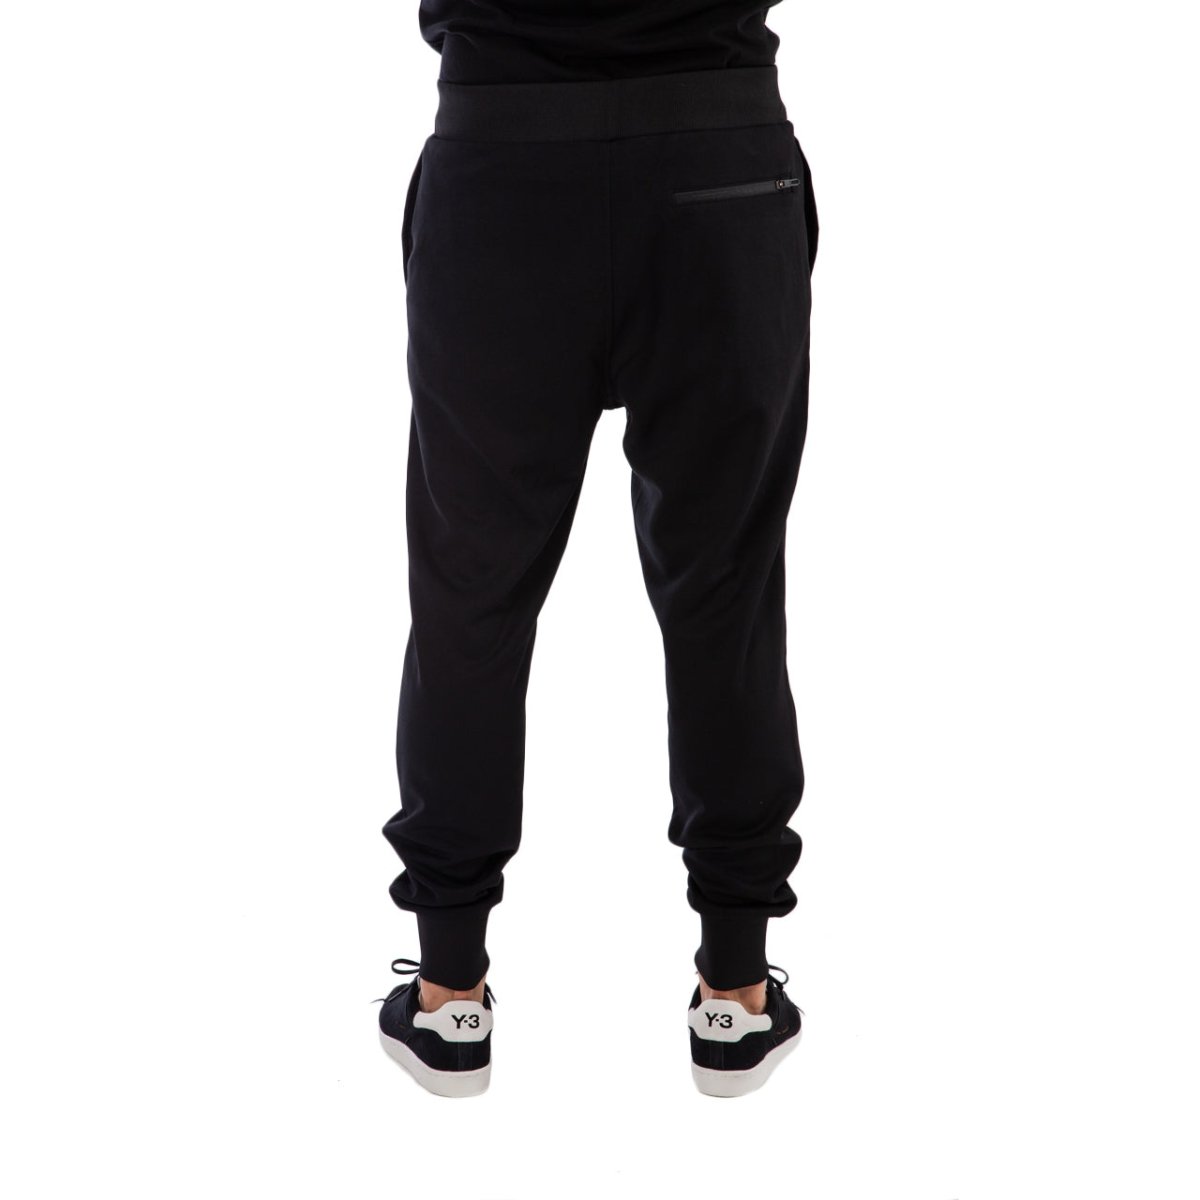 Y-3 Classic Track Pant (Schwarz)  - Allike Store